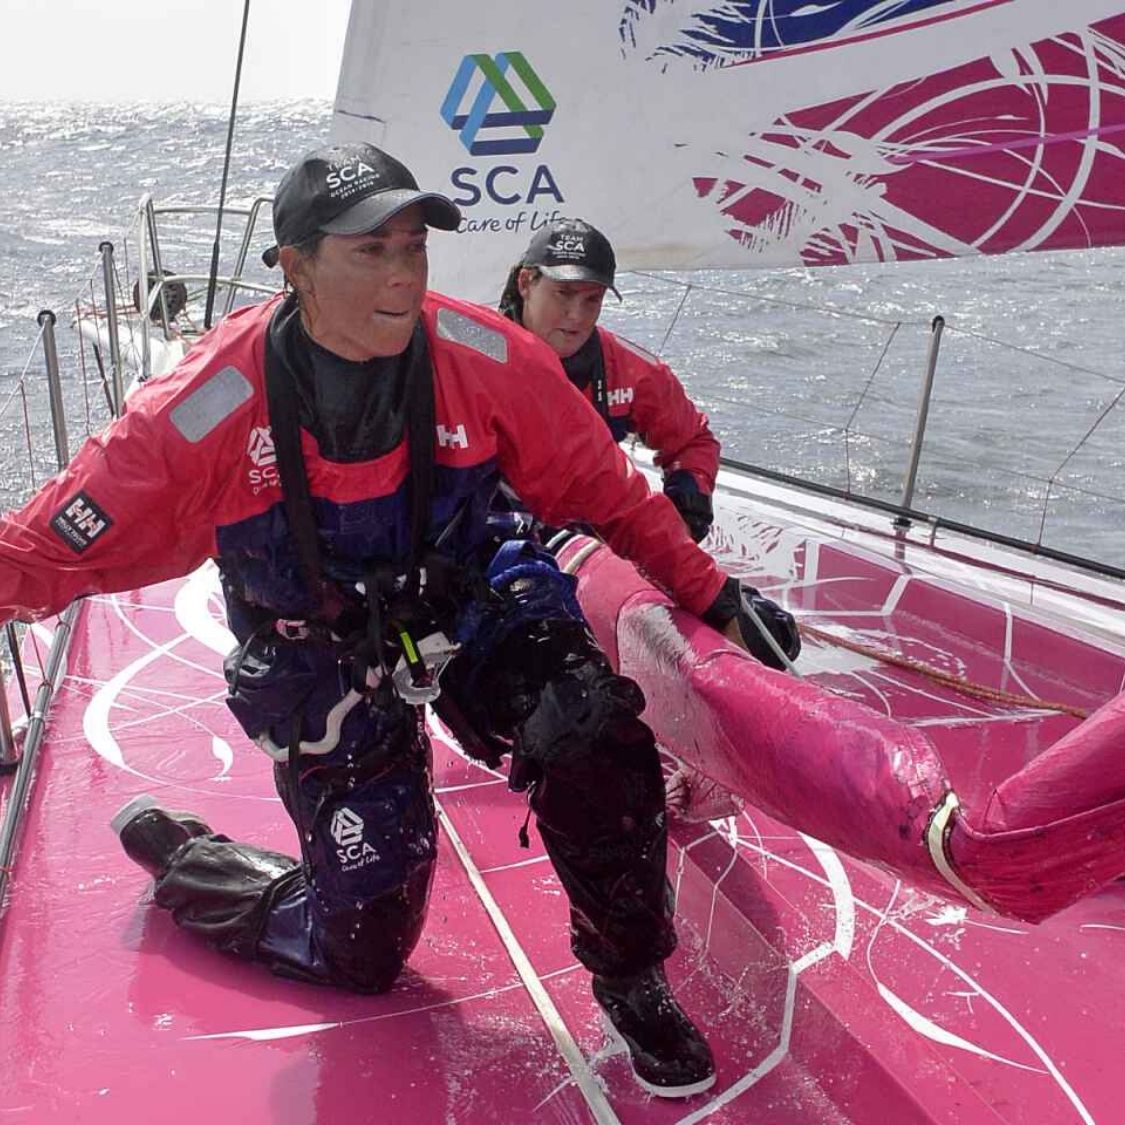 SPT athlete sara hastreiter on the bow of SCA in the Volvo Ocean Race